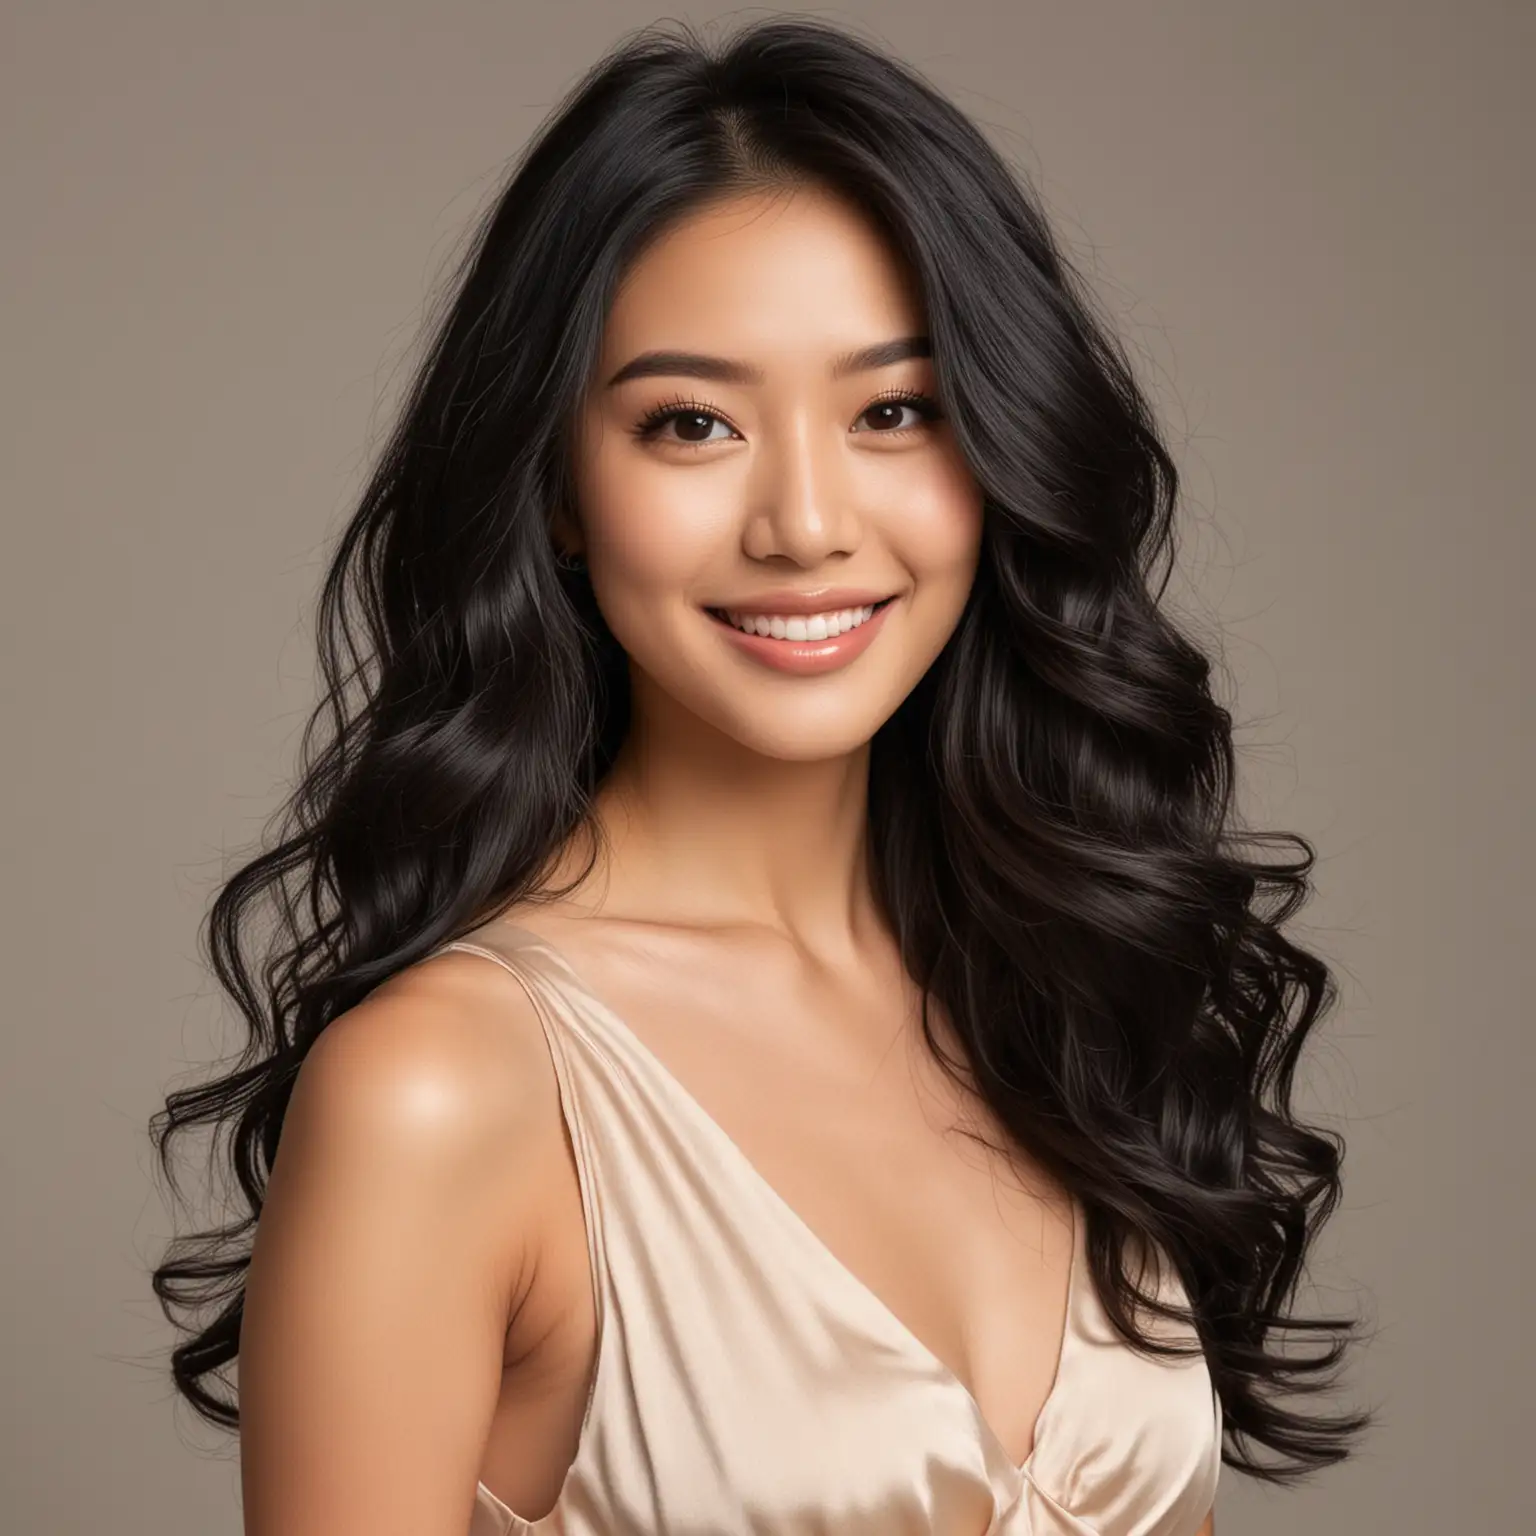 Smiling Asian Woman in Long Wavy Black Hair and Satin Beige Dress